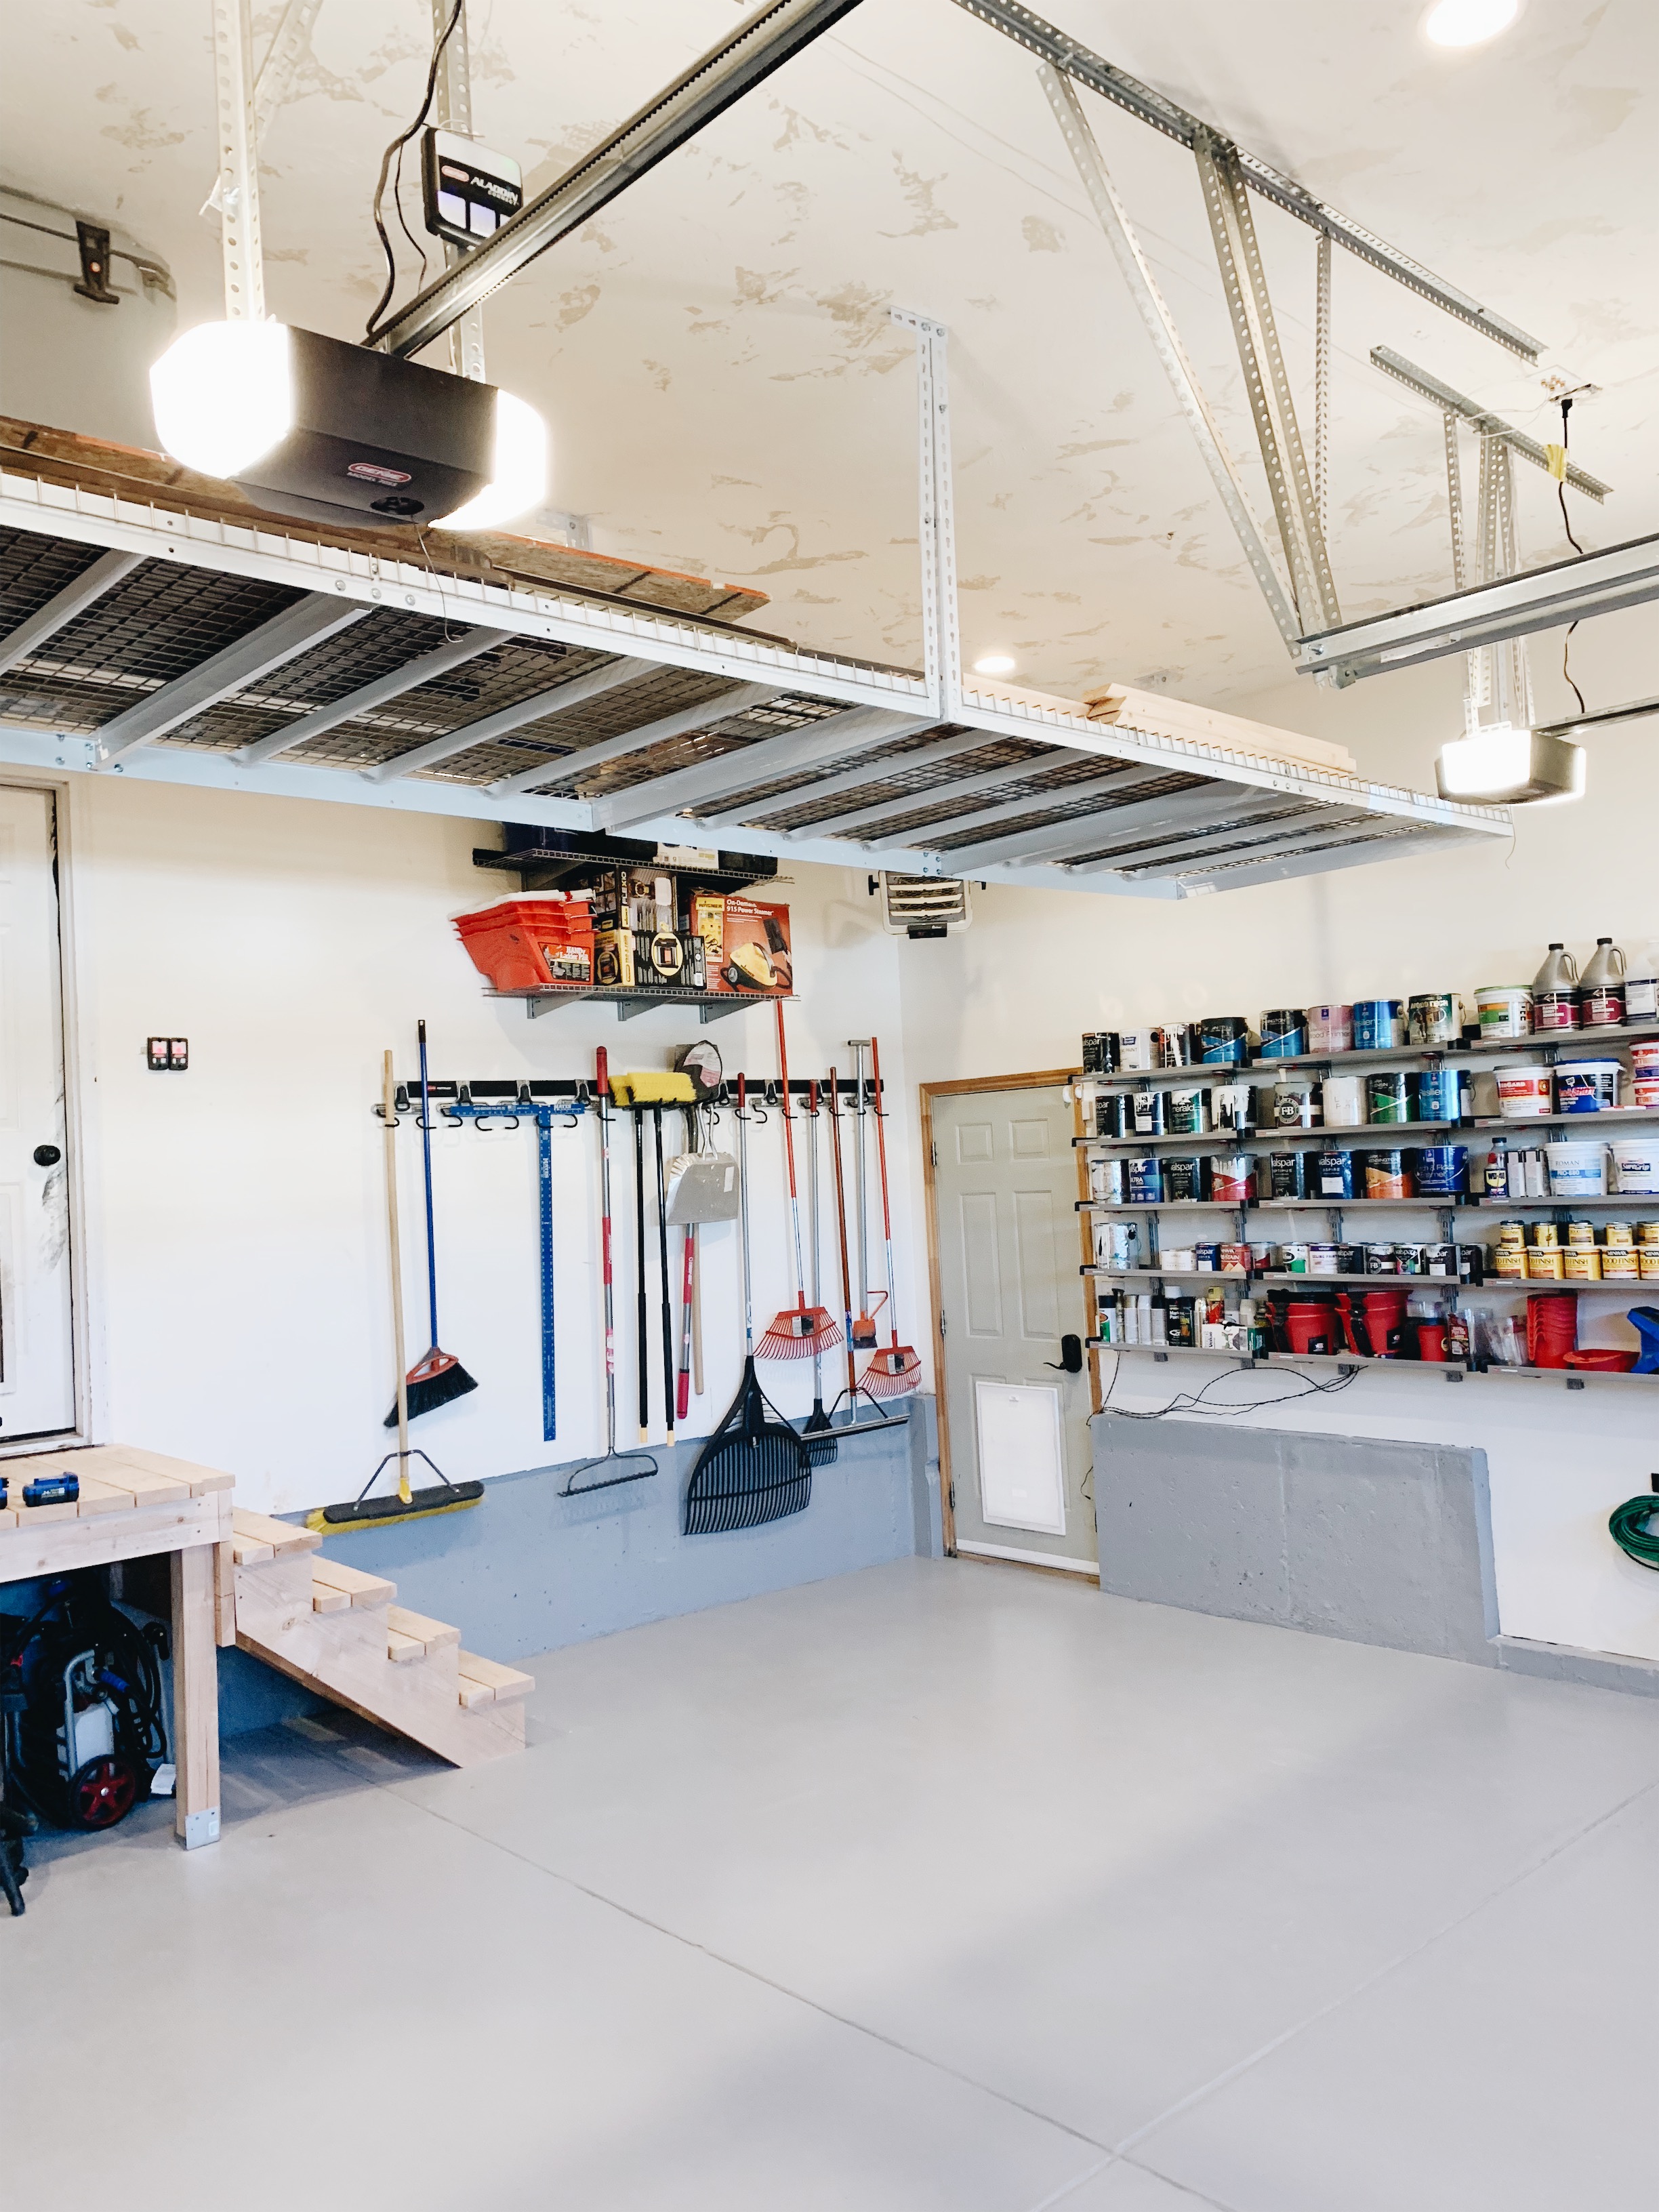 Affordable & Easy to Install Garage Organization Options - Chris Loves Julia